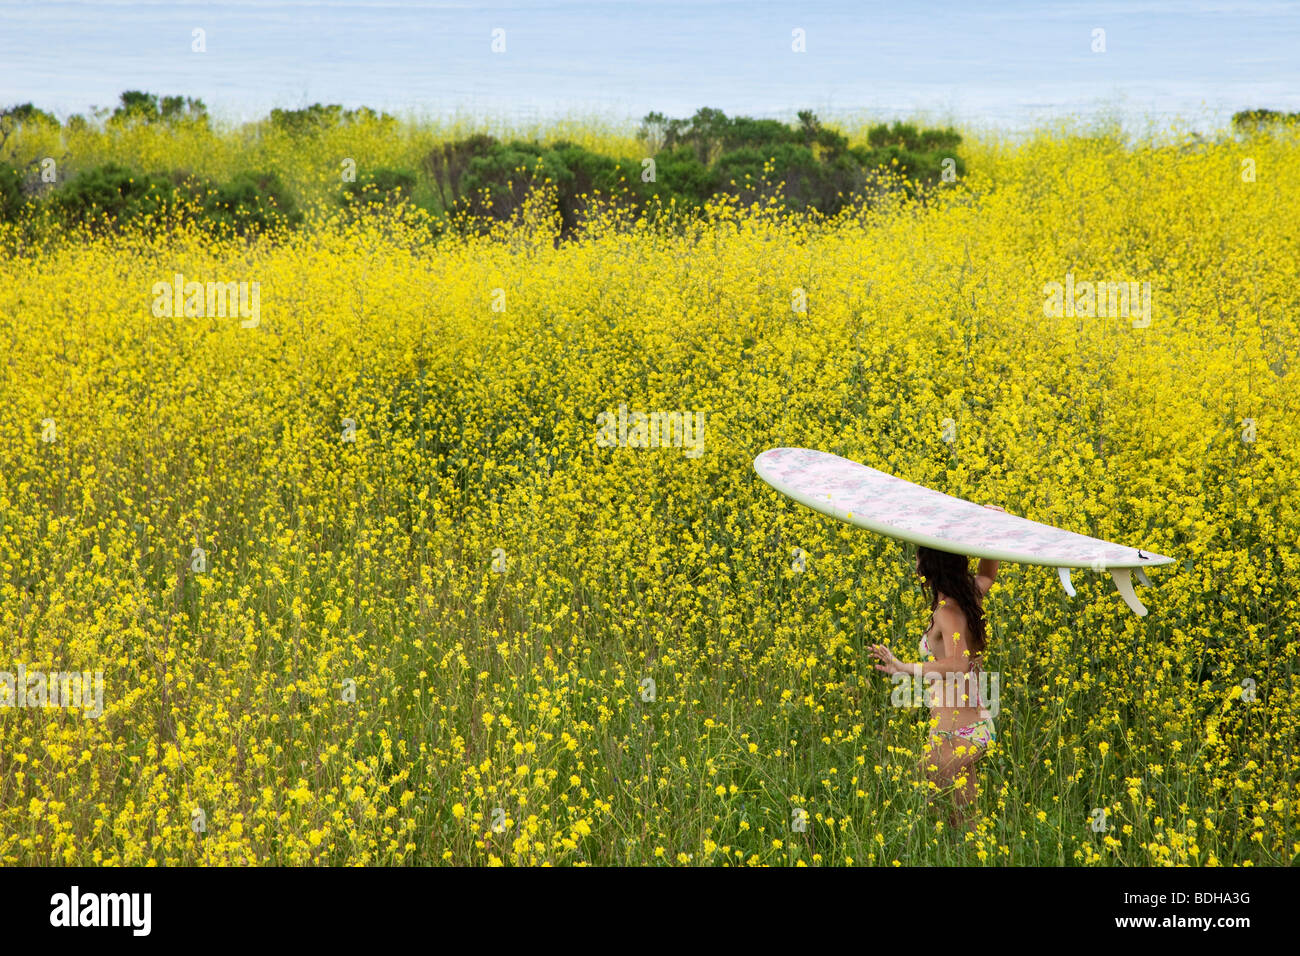 Young woman with a surfboard on her head walking to the beach through a field of yellow flowers. Stock Photo